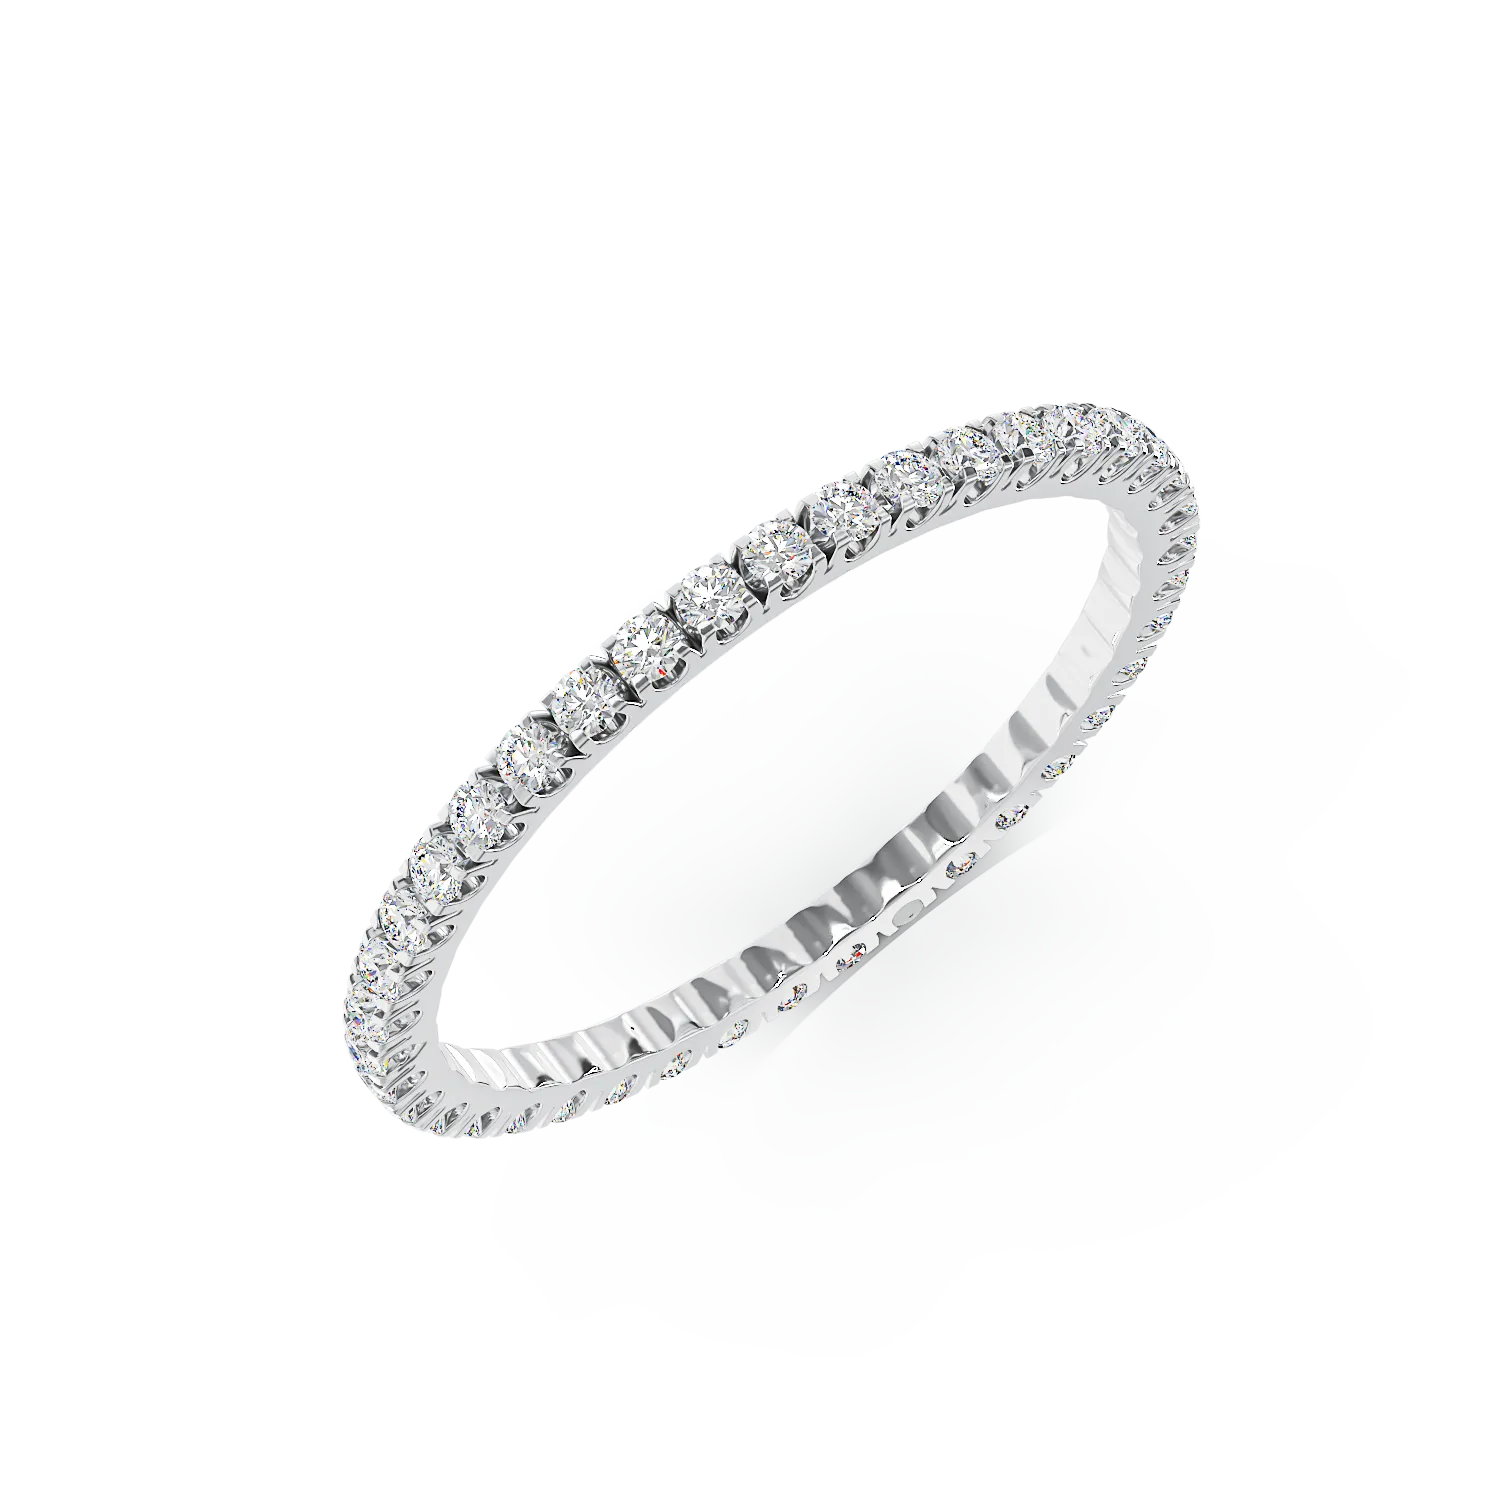 Eternity ring in white gold with 0.5ct diamonds